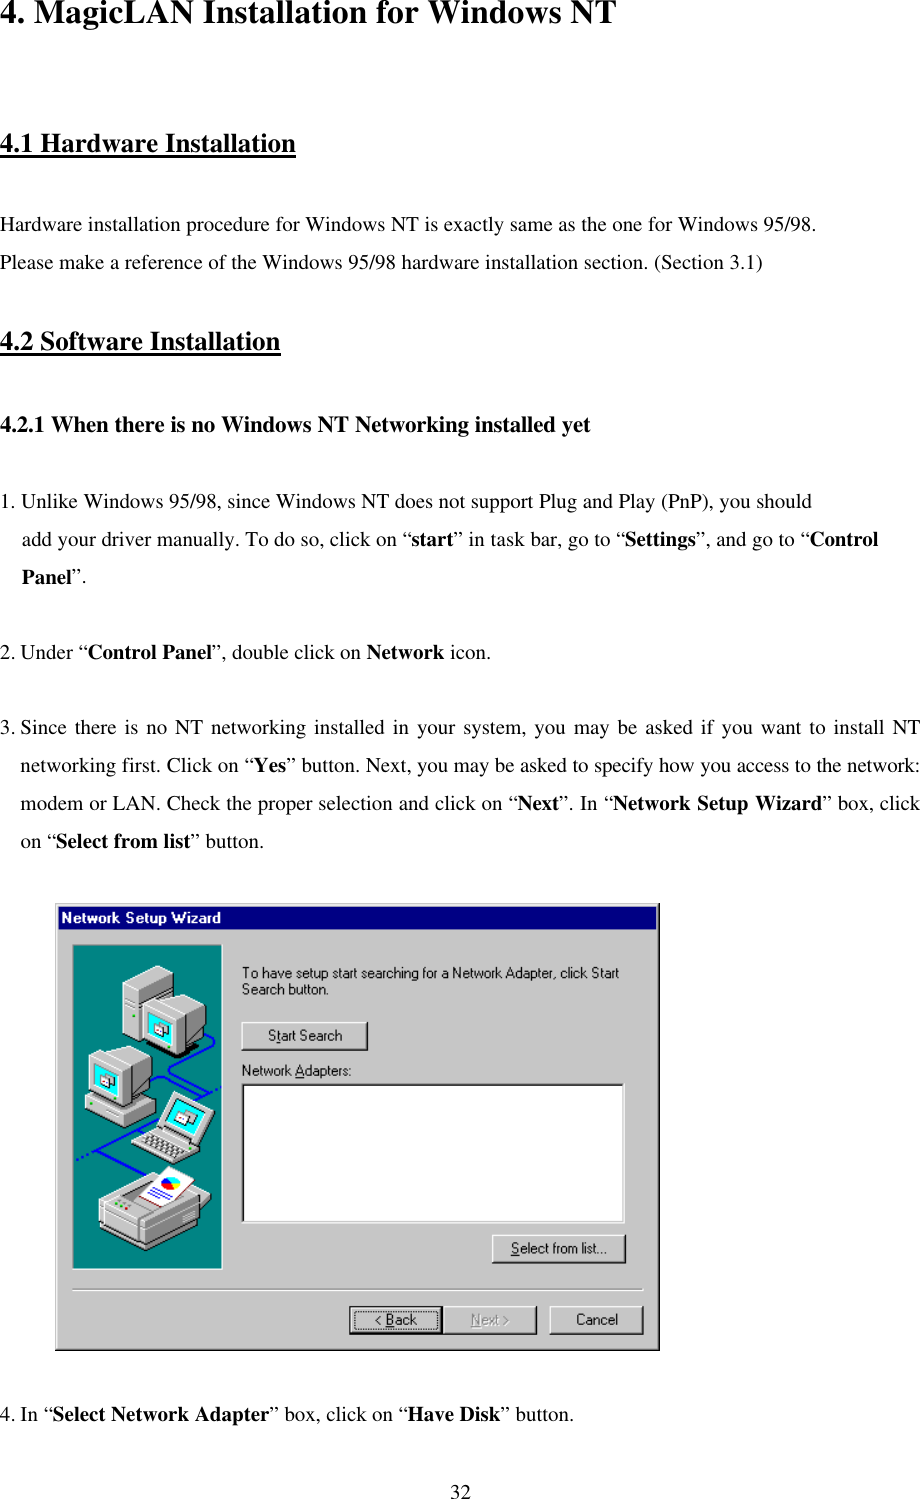  324. MagicLAN Installation for Windows NT   4.1 Hardware Installation  Hardware installation procedure for Windows NT is exactly same as the one for Windows 95/98. Please make a reference of the Windows 95/98 hardware installation section. (Section 3.1)  4.2 Software Installation  4.2.1 When there is no Windows NT Networking installed yet   1. Unlike Windows 95/98, since Windows NT does not support Plug and Play (PnP), you should     add your driver manually. To do so, click on “start” in task bar, go to “Settings”, and go to “Control     Panel”.  2. Under “Control Panel”, double click on Network icon.   3. Since there is no NT networking installed in your system, you may be asked if you want to install NT networking first. Click on “Yes” button. Next, you may be asked to specify how you access to the network: modem or LAN. Check the proper selection and click on “Next”. In “Network Setup Wizard” box, click on “Select from list” button.               4. In “Select Network Adapter” box, click on “Have Disk” button. 